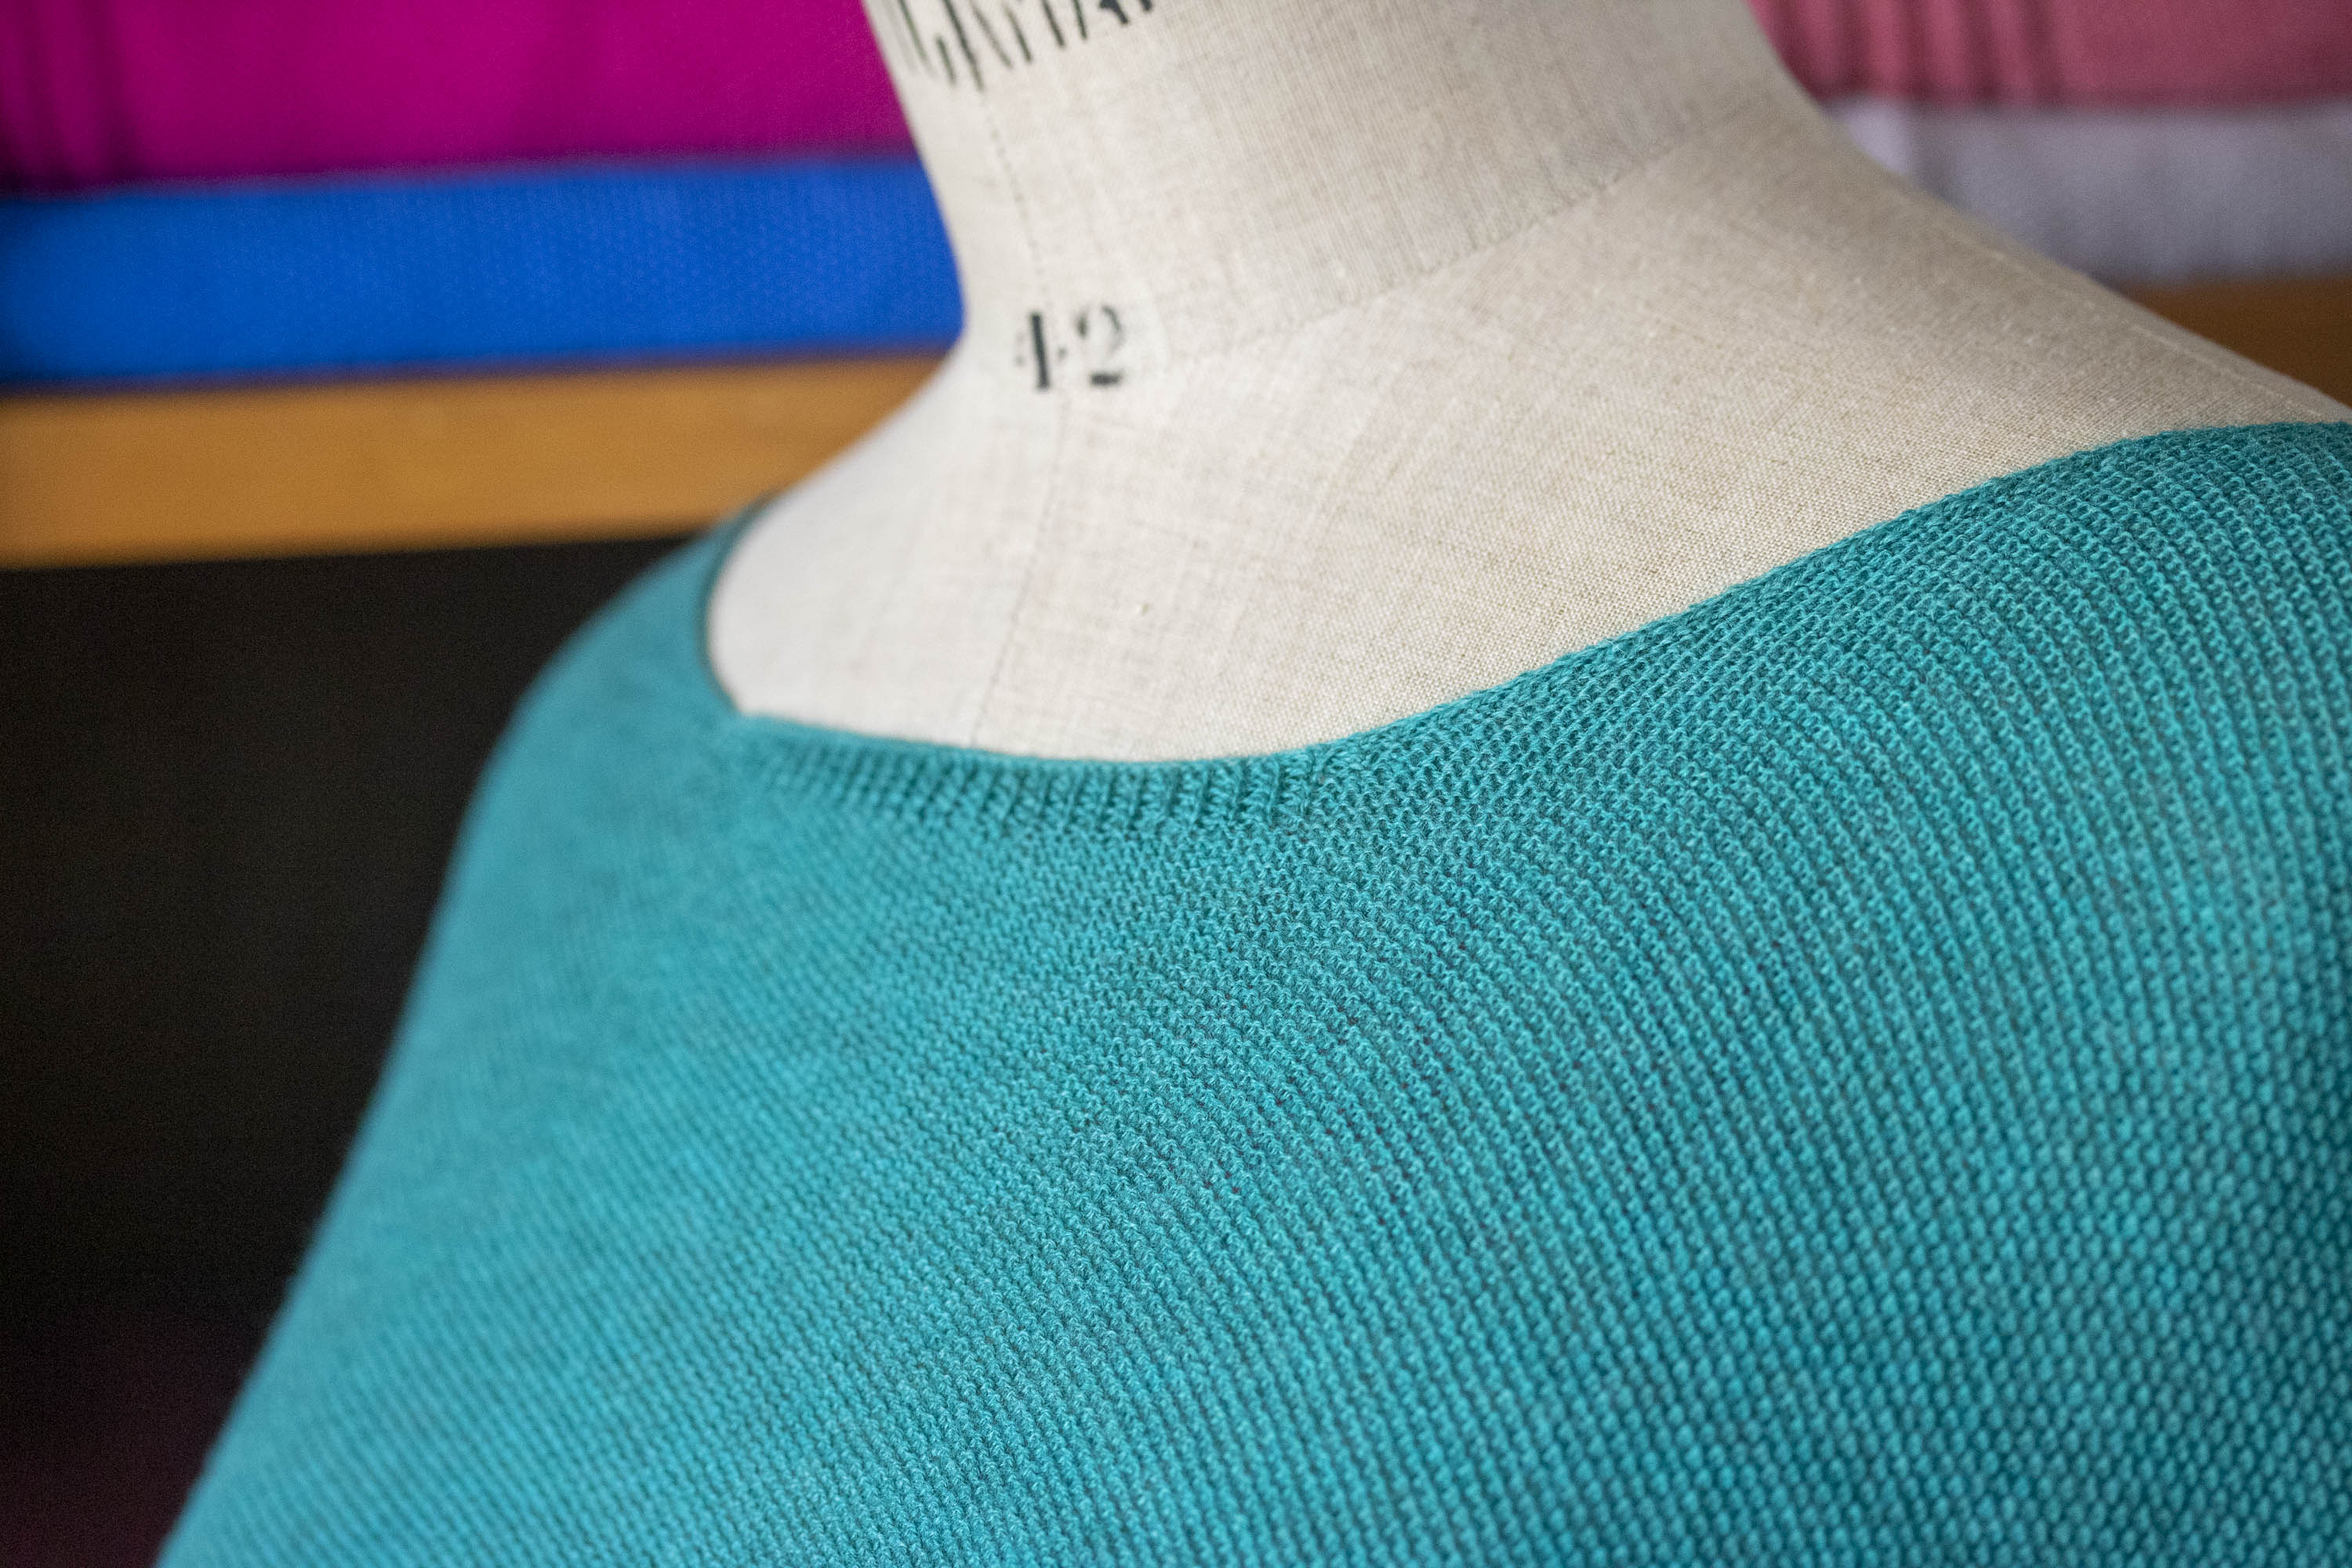 Detail of neckline on Saand holiday jumper - a lightweight, textured knit in merino yarn. Shown in a bright turquoise